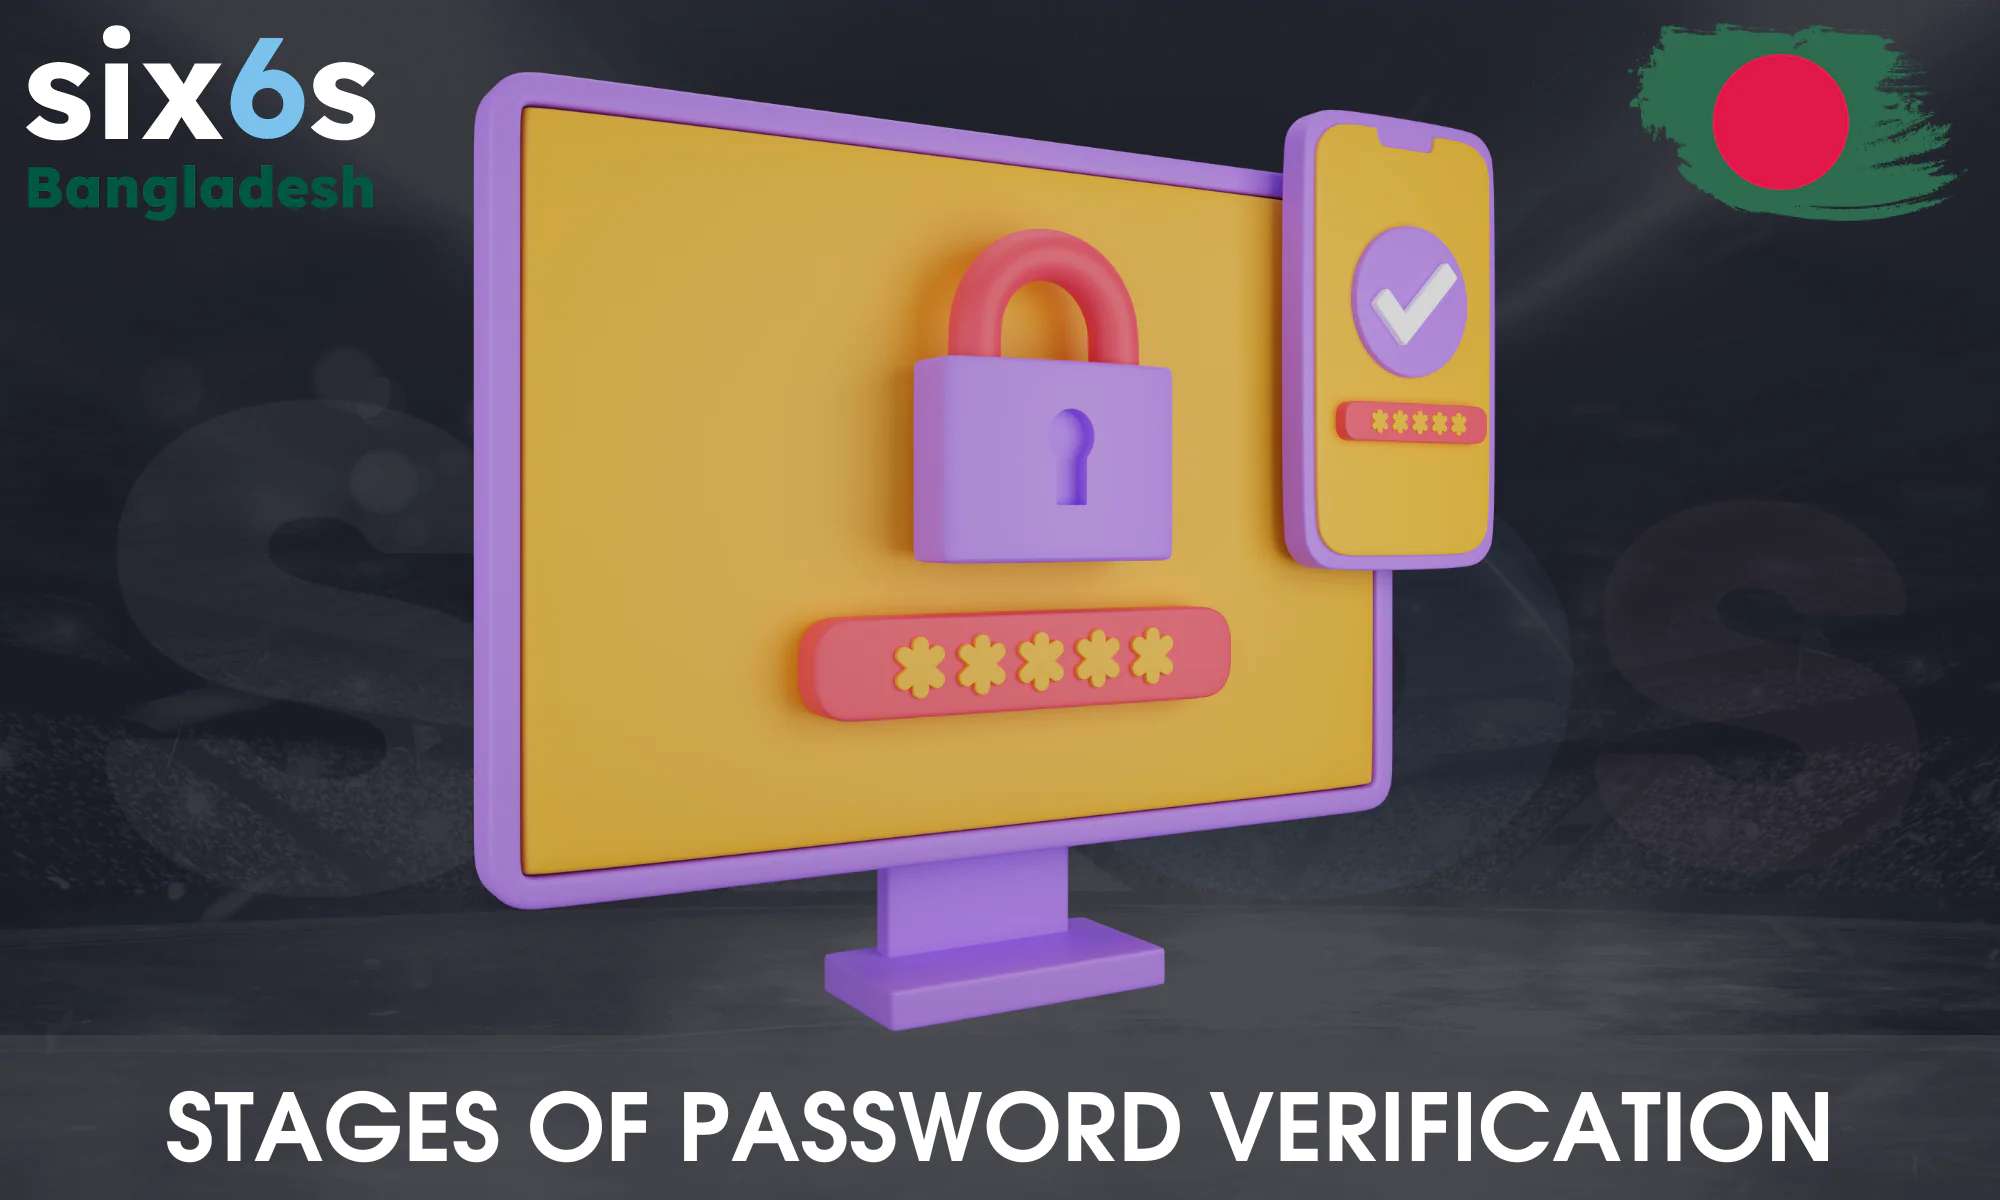 An overview of the password verification and authentication process in Six6s